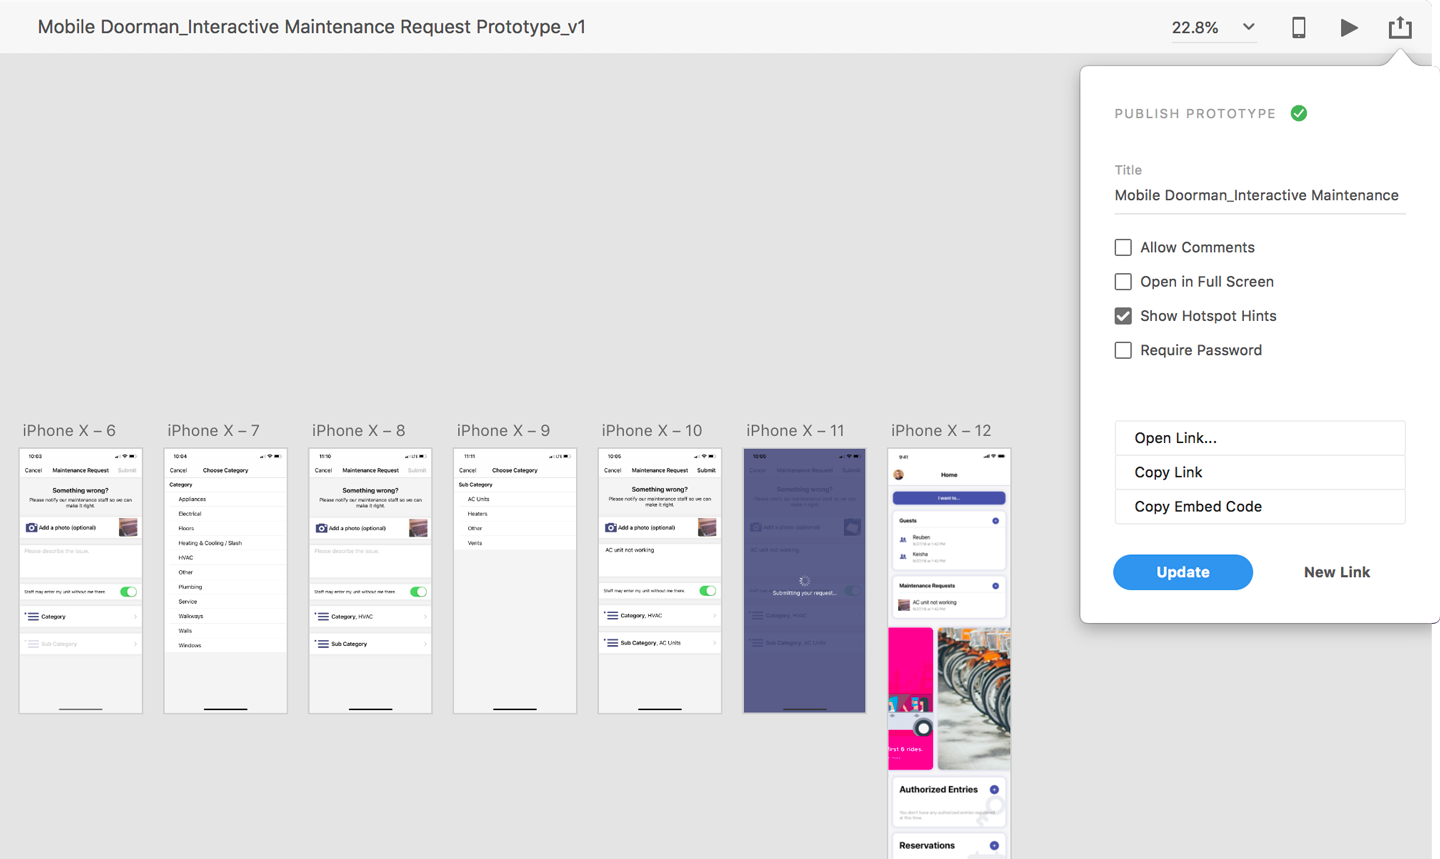 A screenshot of Adobe XD's Publish Prototype feature with Links enabled.